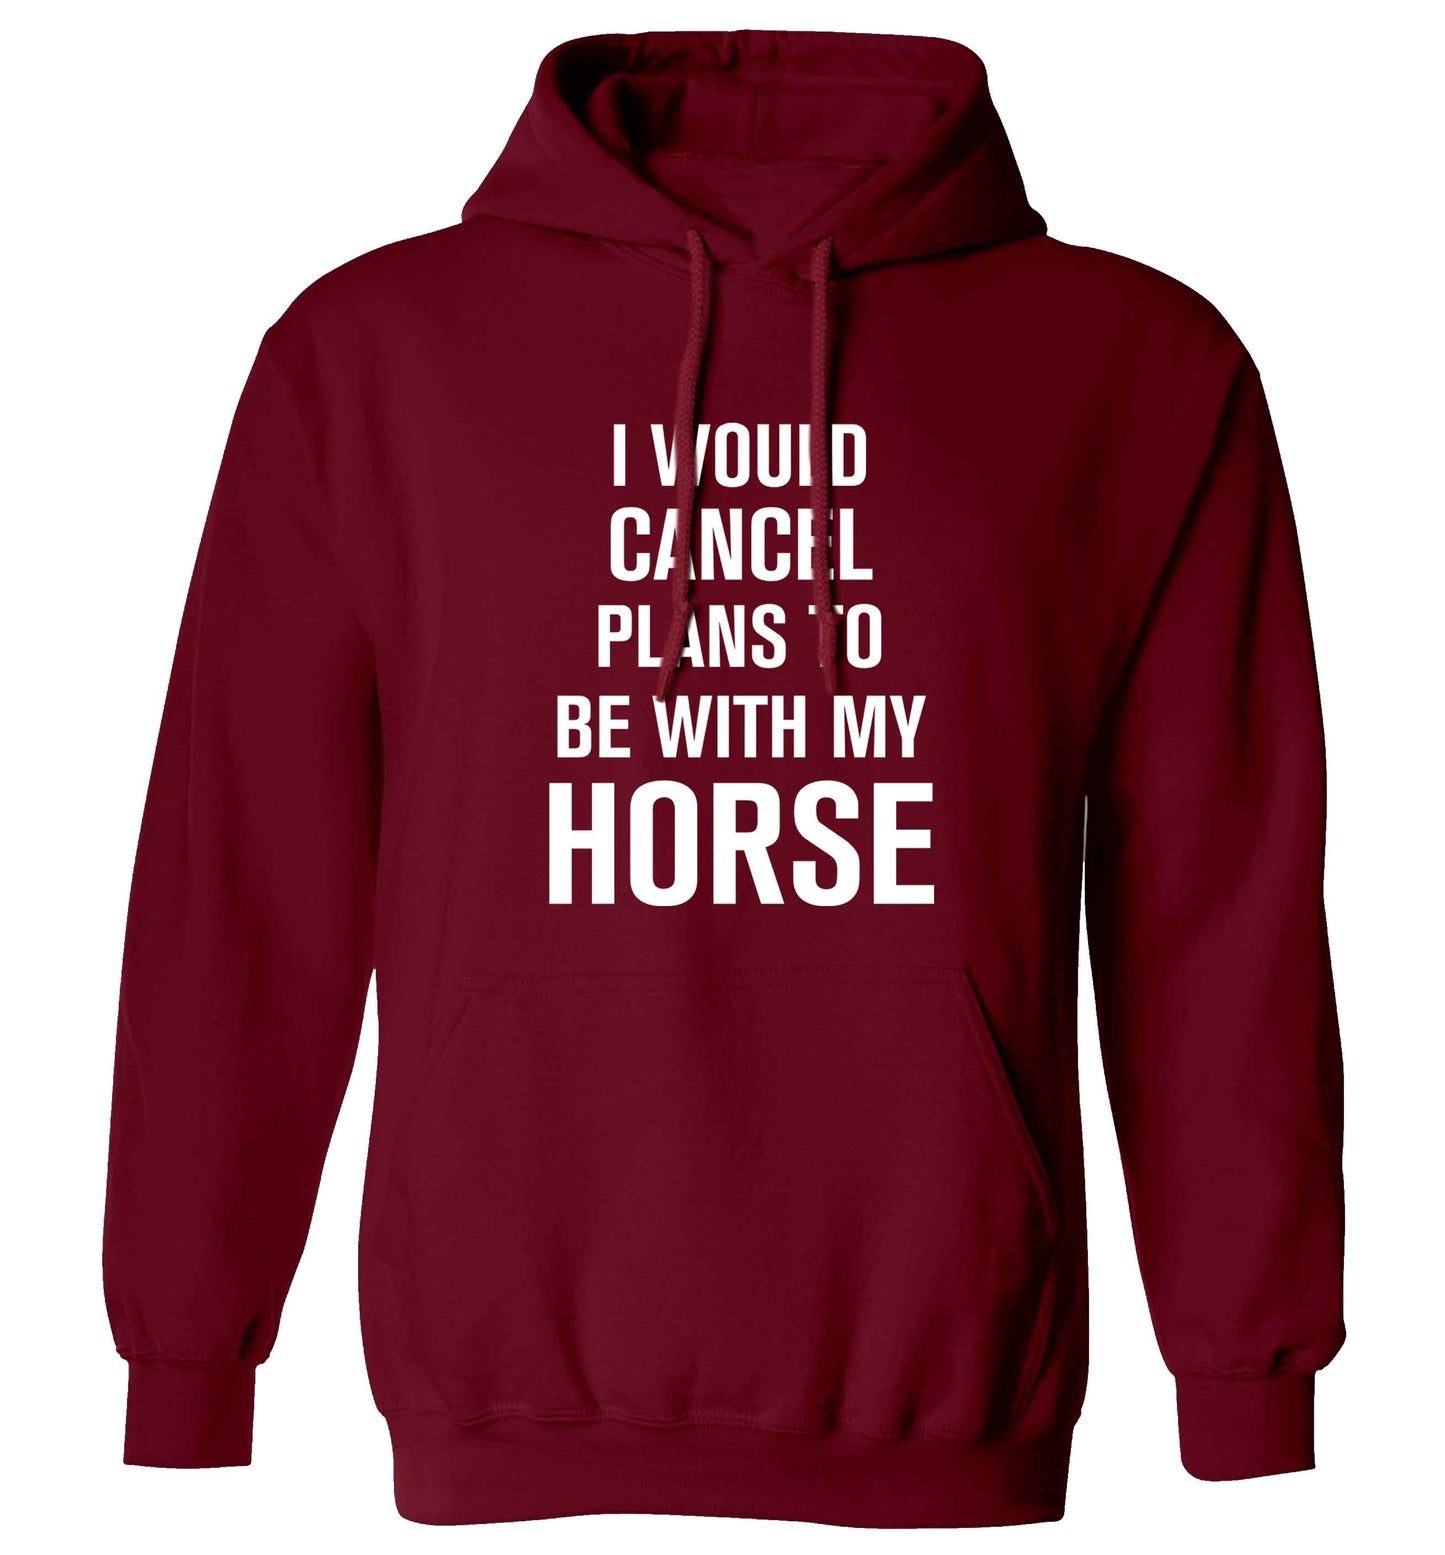 I will cancel plans to be with my horse adults unisex maroon hoodie 2XL